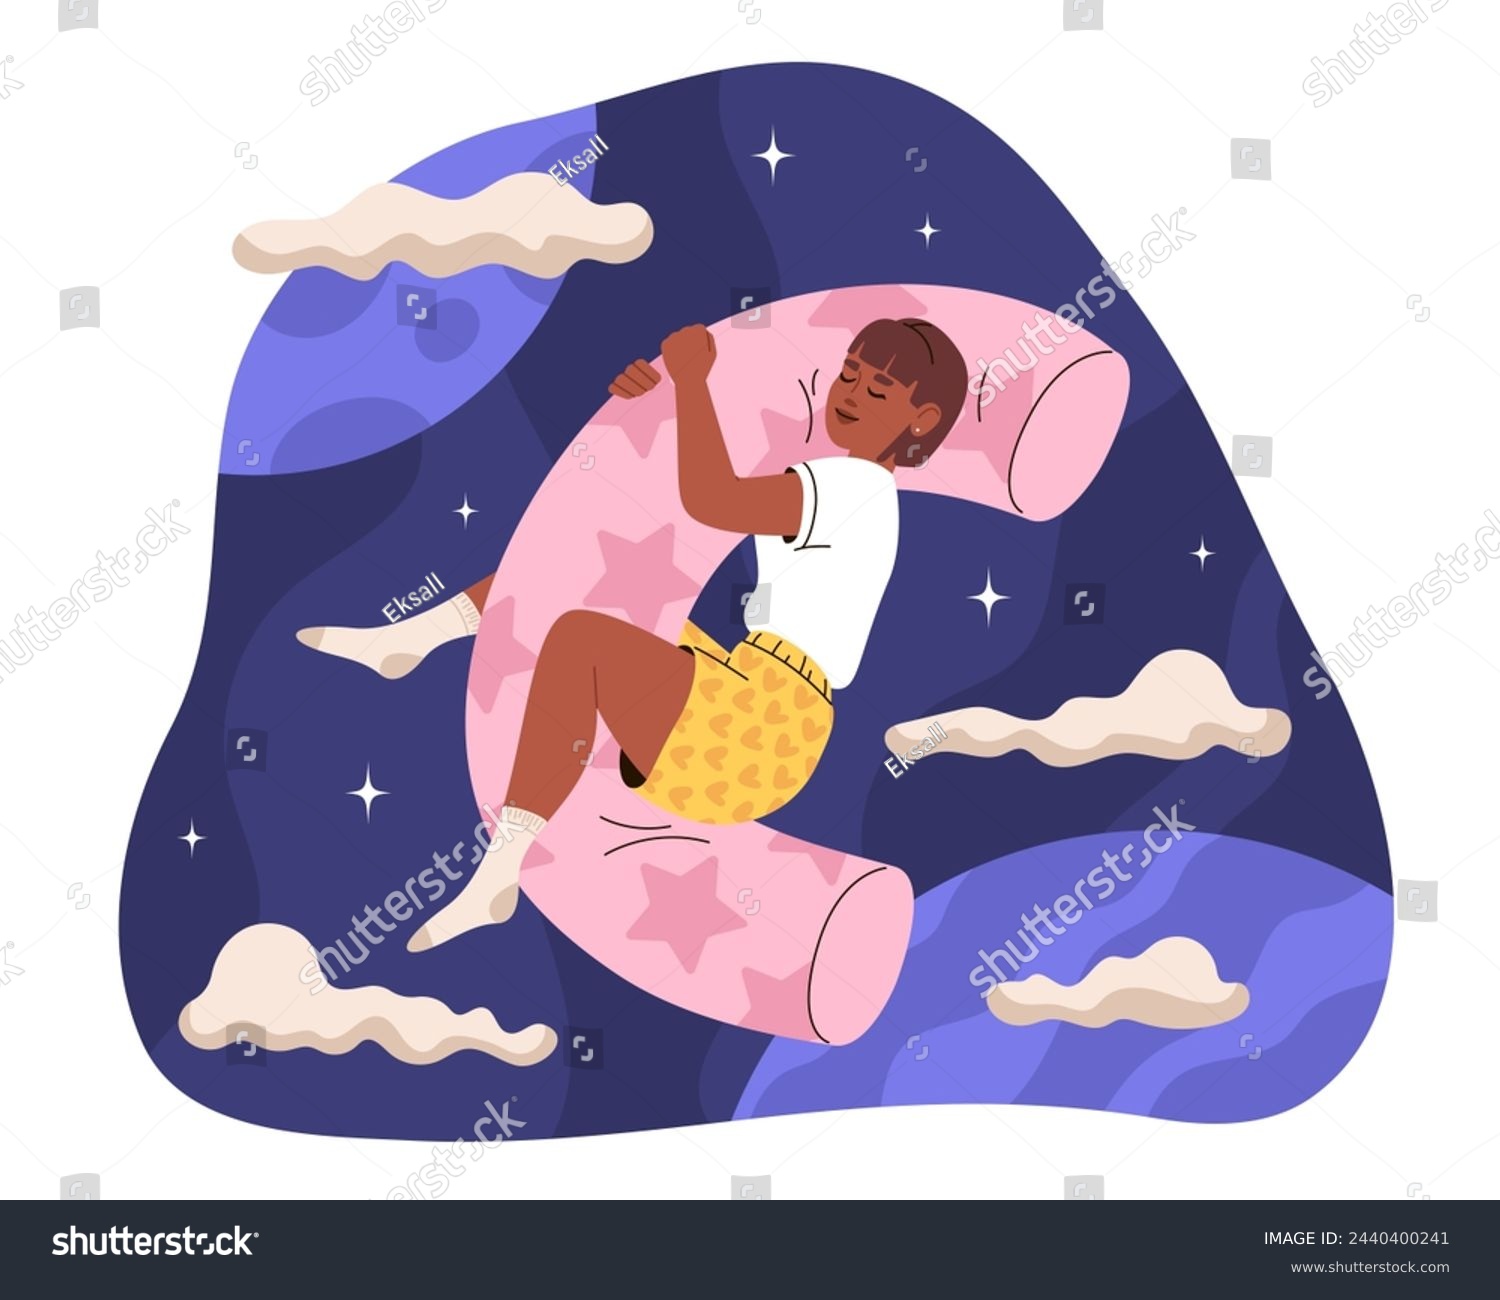 SVG of Young woman falls asleep on orthopedic body pillow. Girl hugs pillow and sleeps sweetly. Person naps among clouds, stars and planets in space. Healthy sleep, dreams. svg